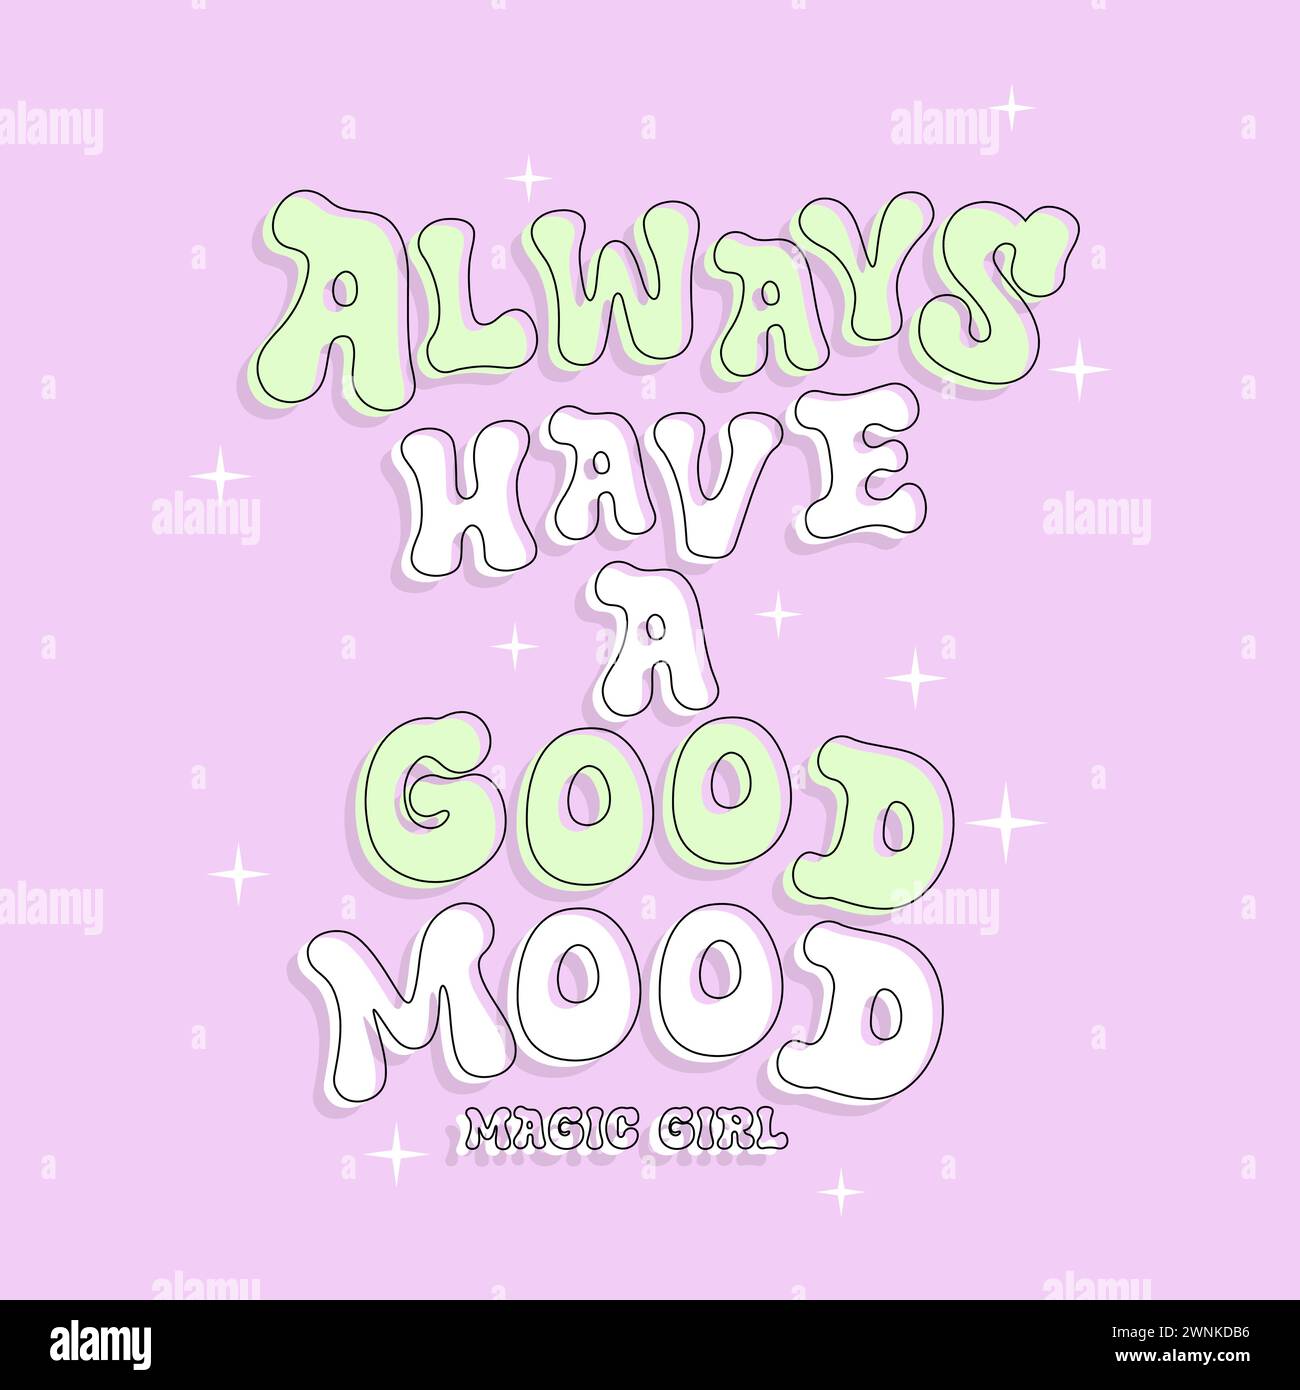 Always have a good mood magic girl typography slogan. Vector illustration design for fashion graphics, t shirt prints, posters. Stock Vector